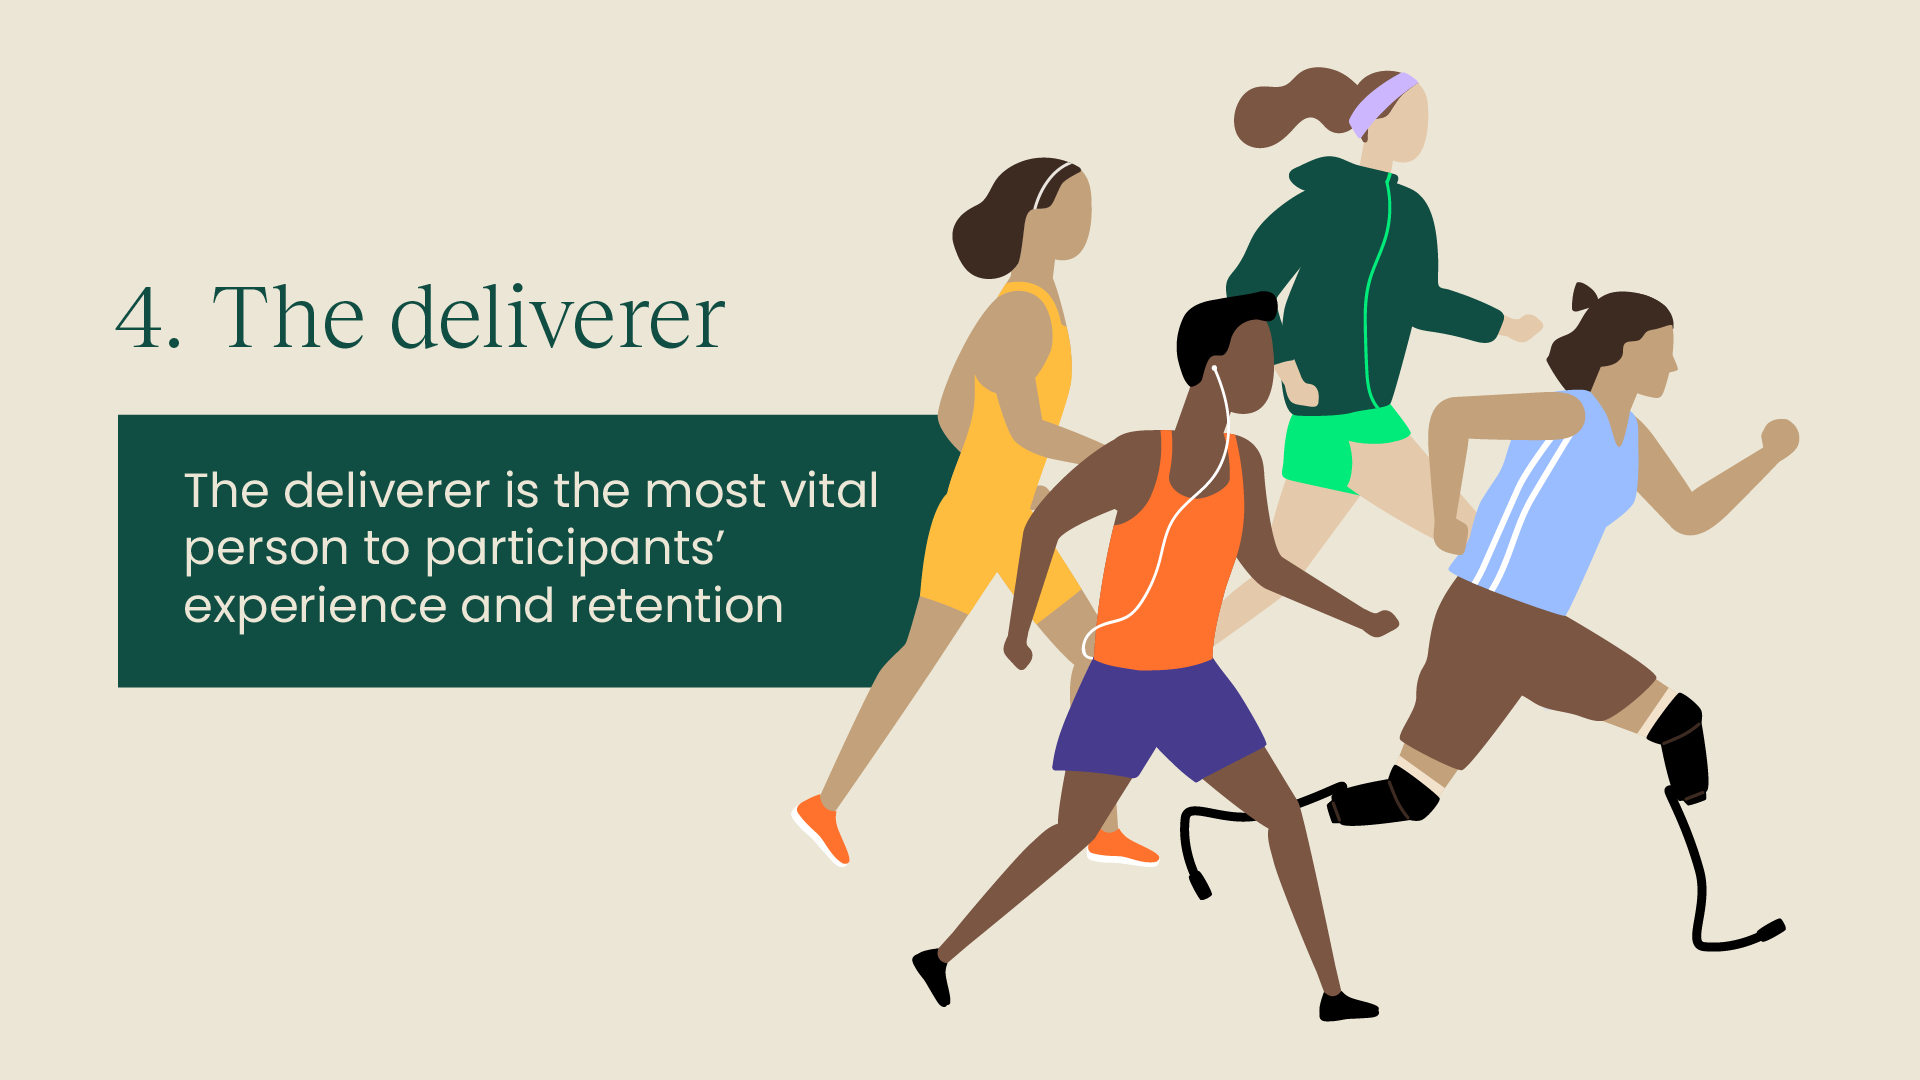 4. The deliverer: The deliverer is the most vital person to participants' experience and retention